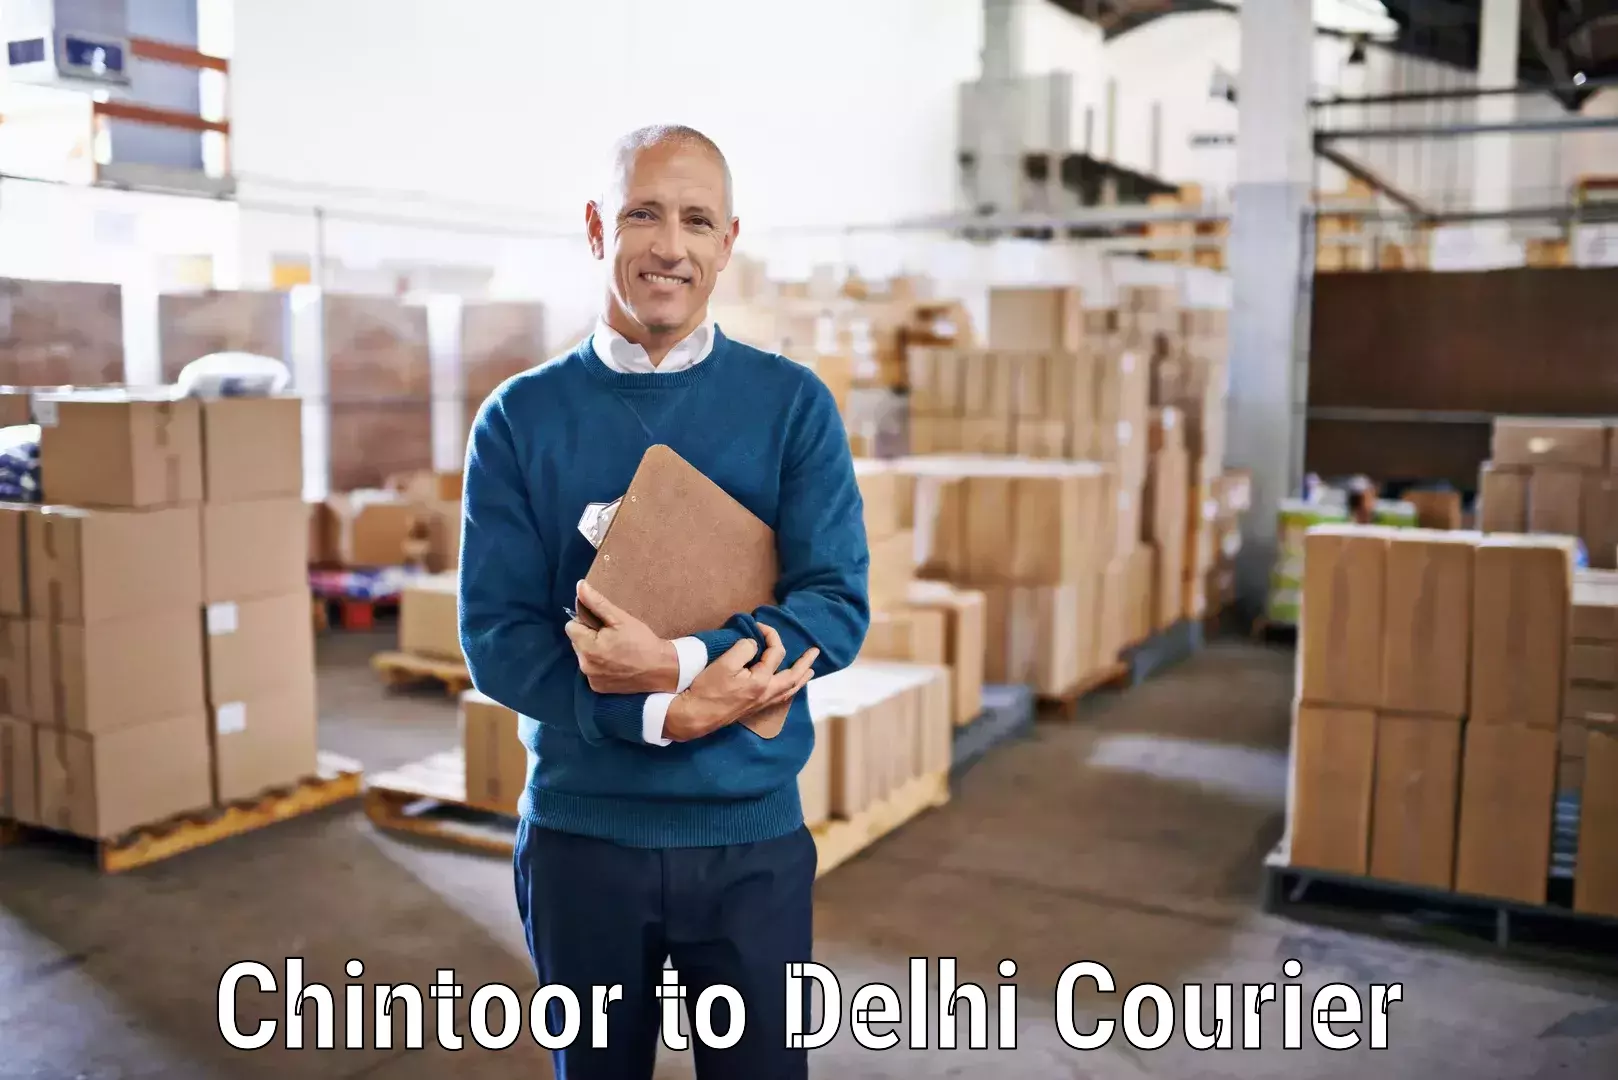 Domestic delivery options Chintoor to Jawaharlal Nehru University New Delhi